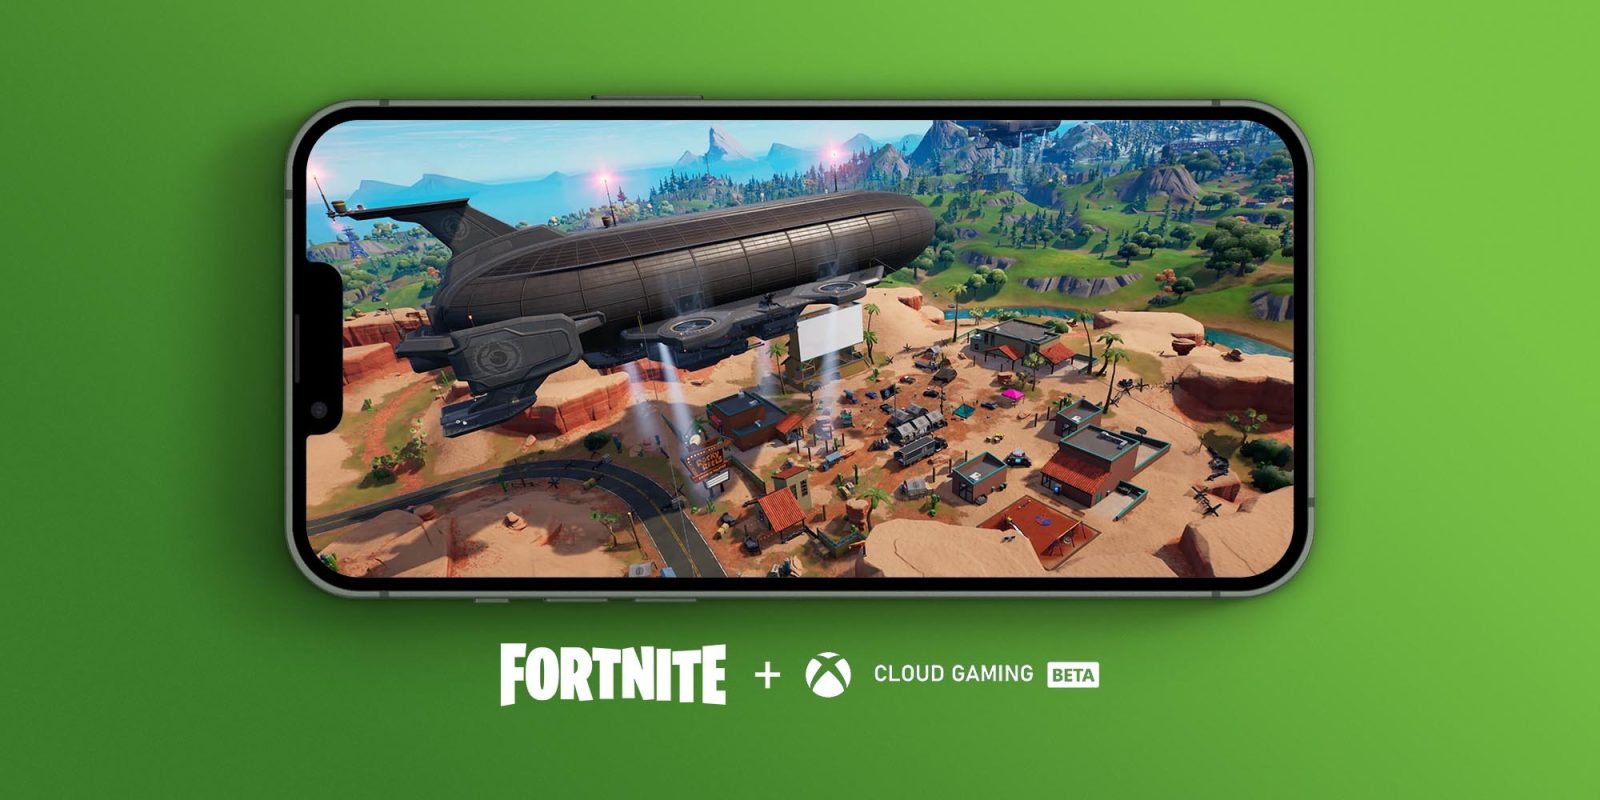 Fortnite on iOS: Now available again thanks to Microsoft - 9to5Mac